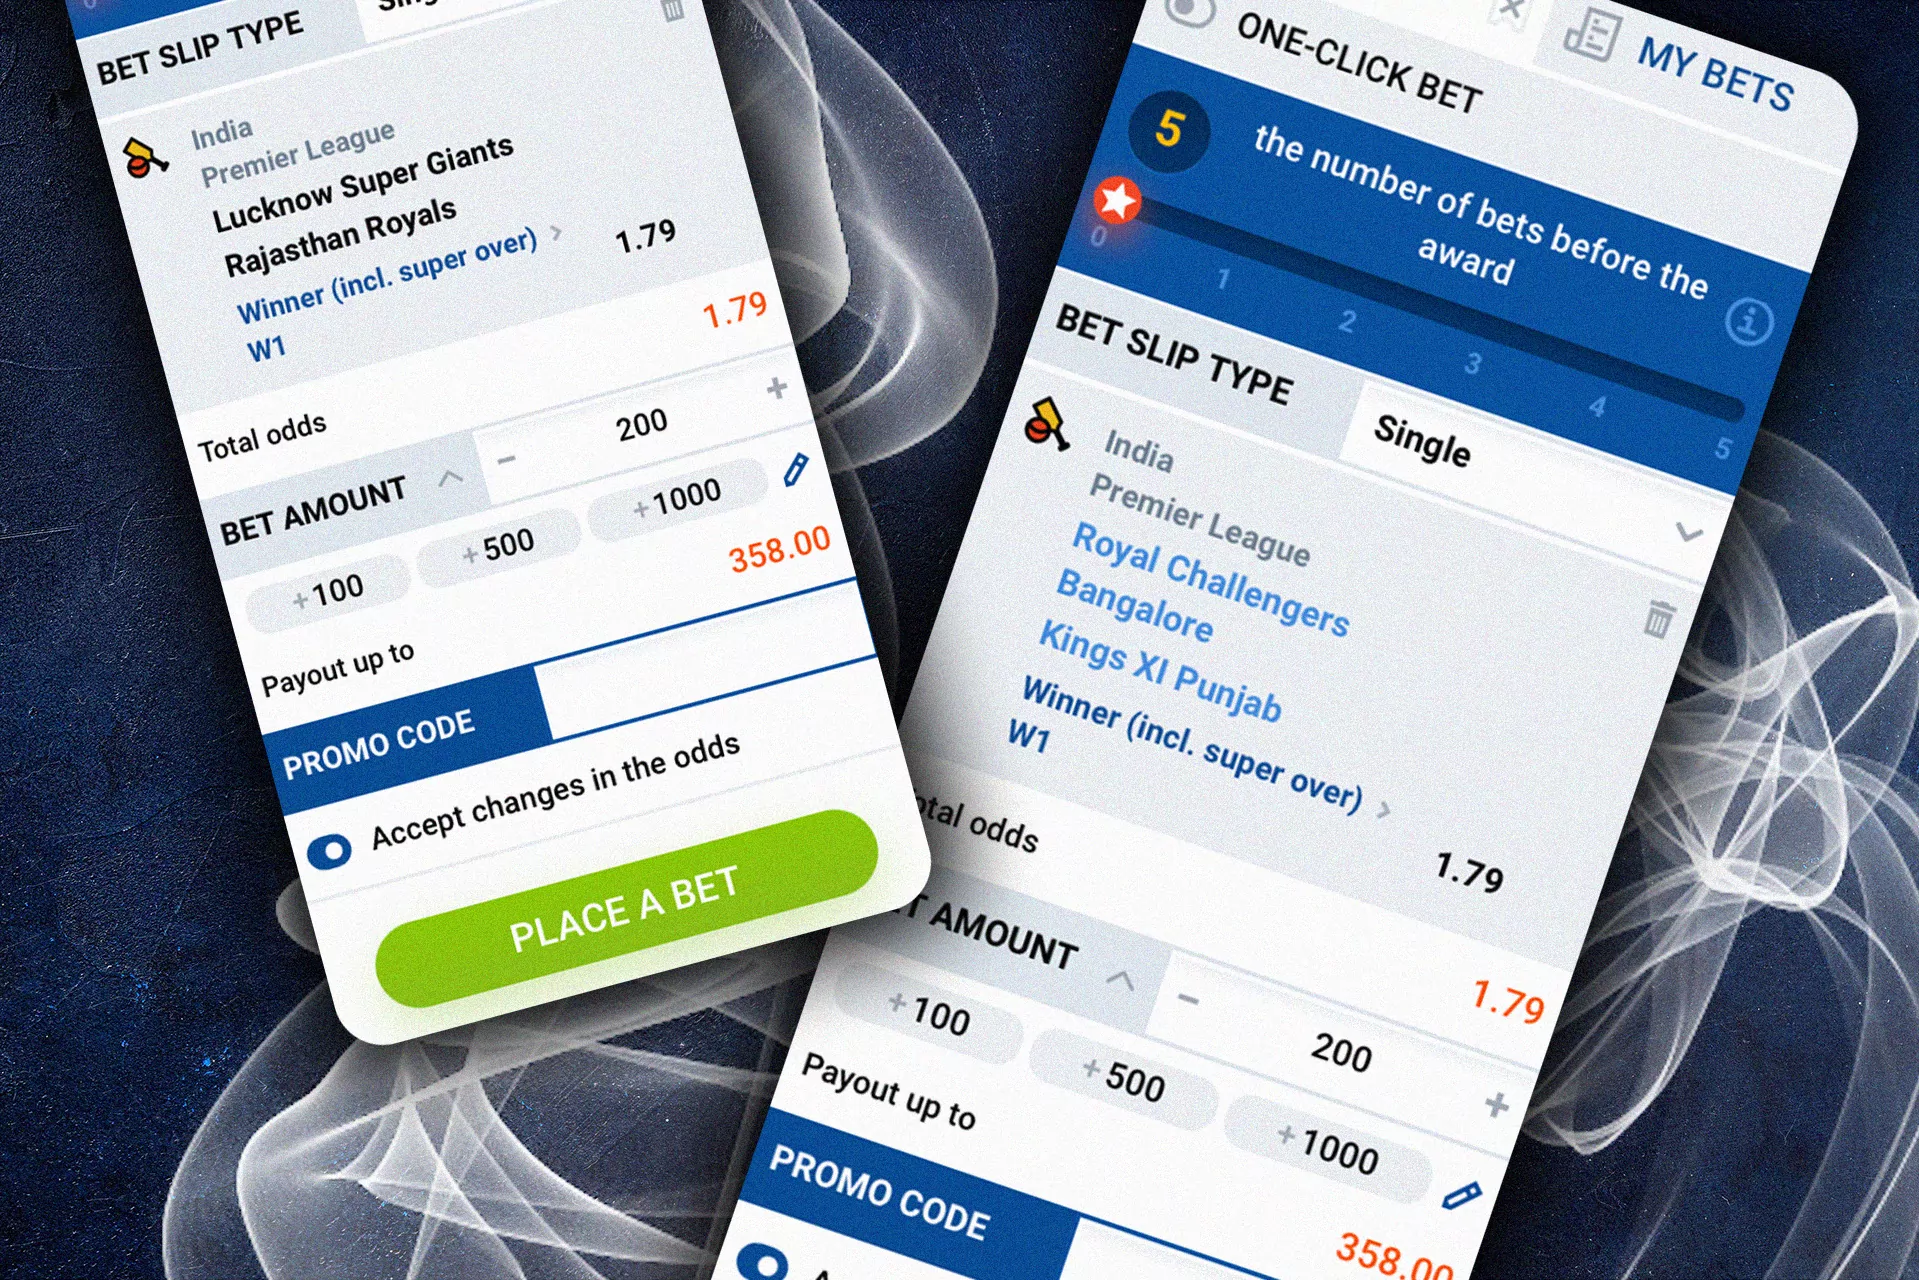 Place single bets on Mostbet if you are new to betting.